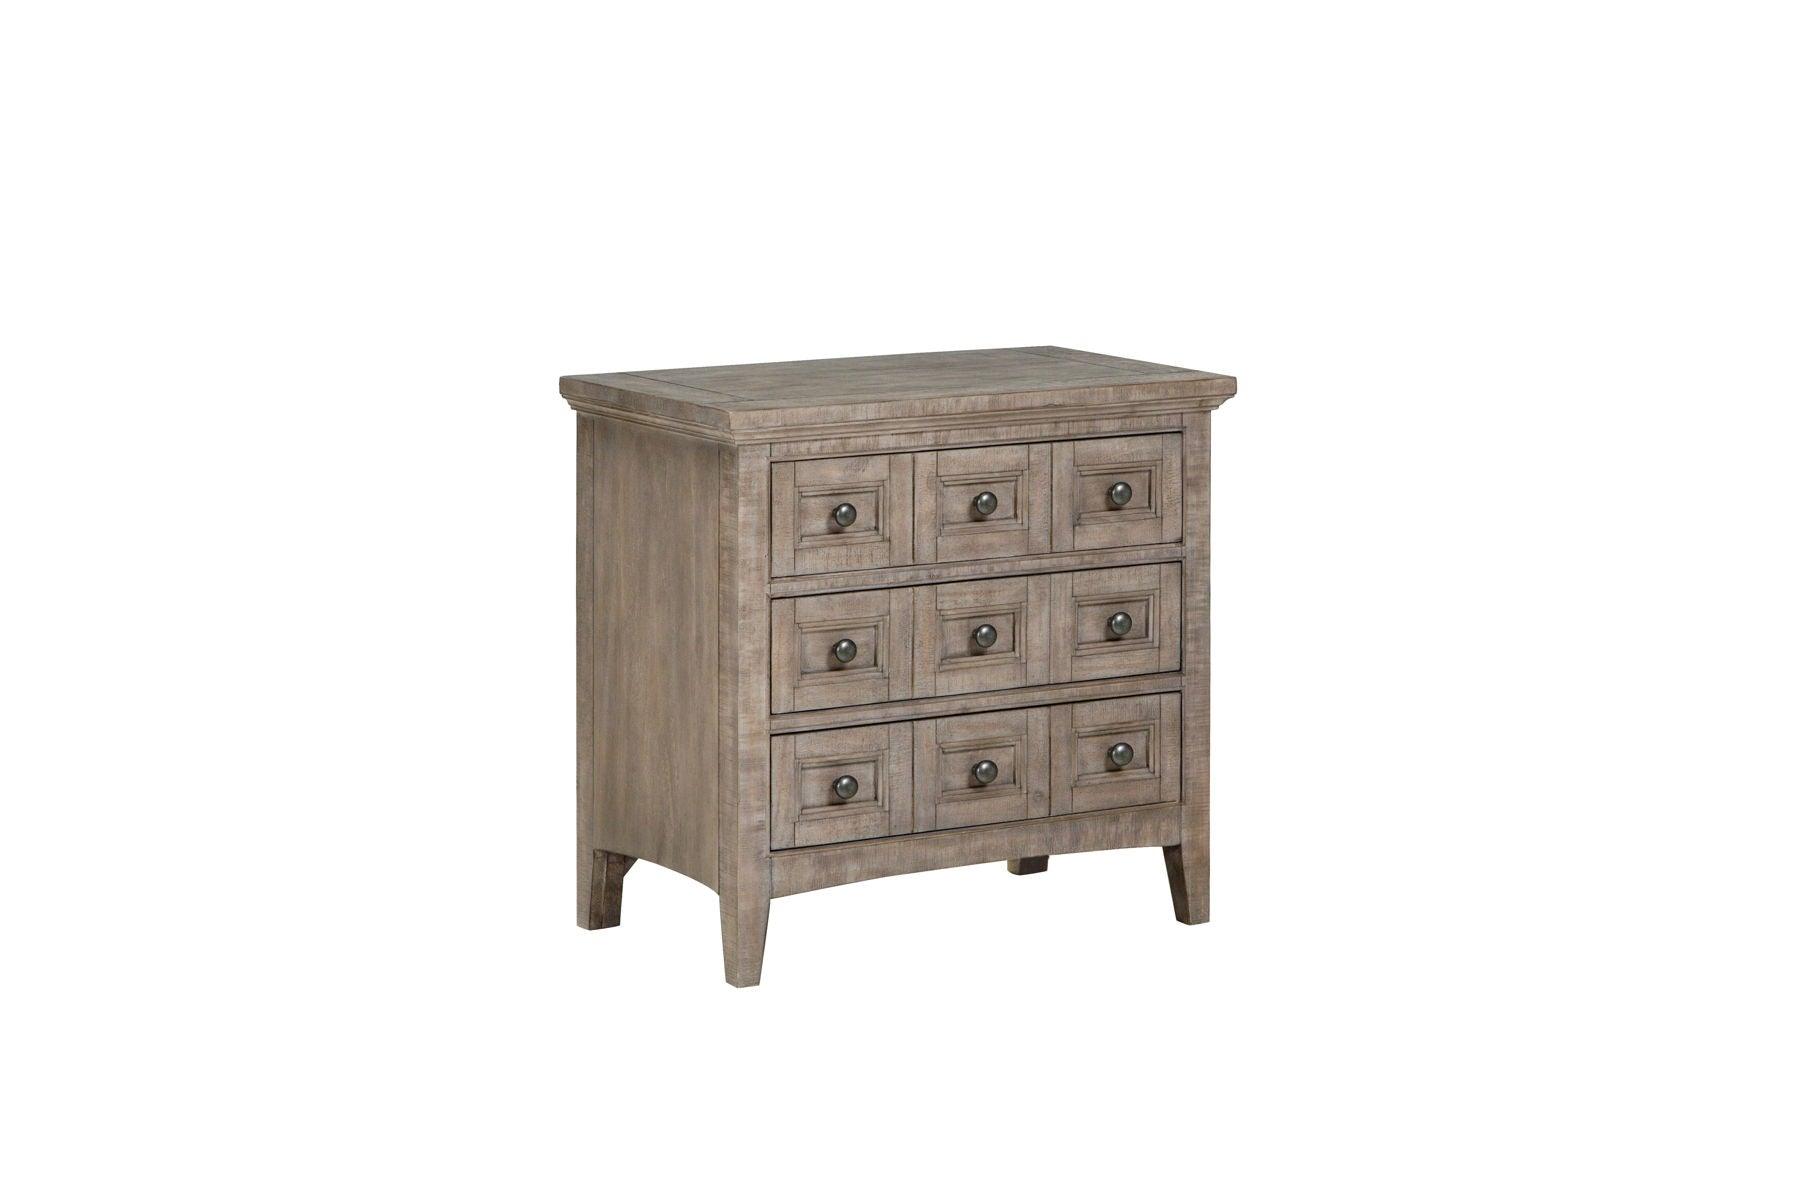 Magnussen Furniture - Paxton Place - Wood Drawer Nightstand - Dove Tail Grey - 5th Avenue Furniture